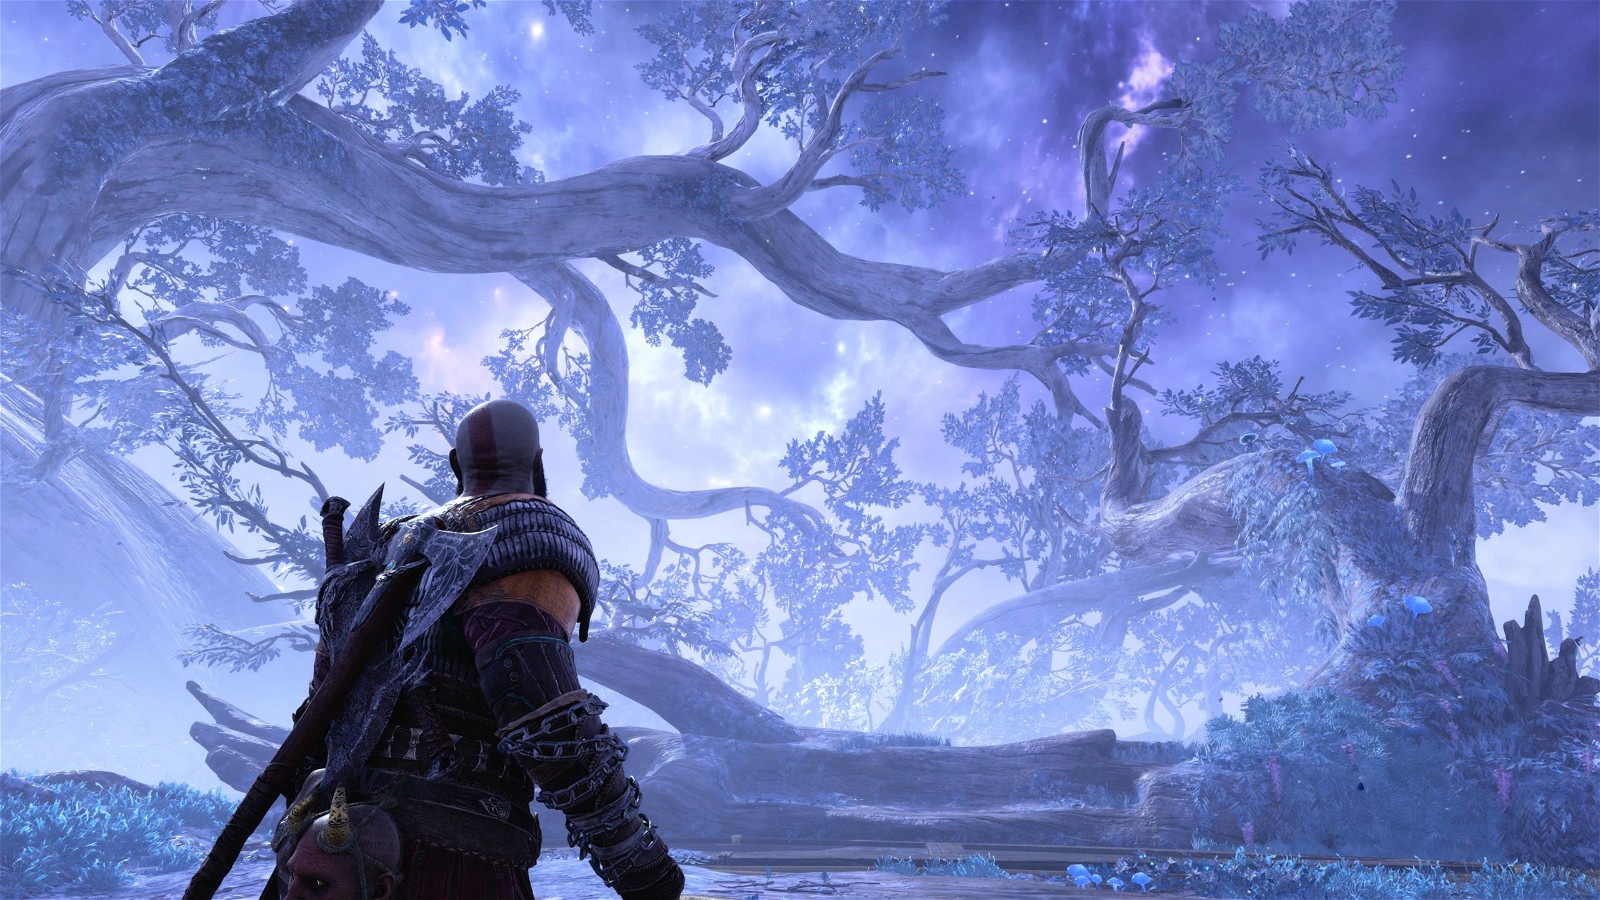 Much like Yggdrasil holds several realms, we might see several pantheons in God of War 6.